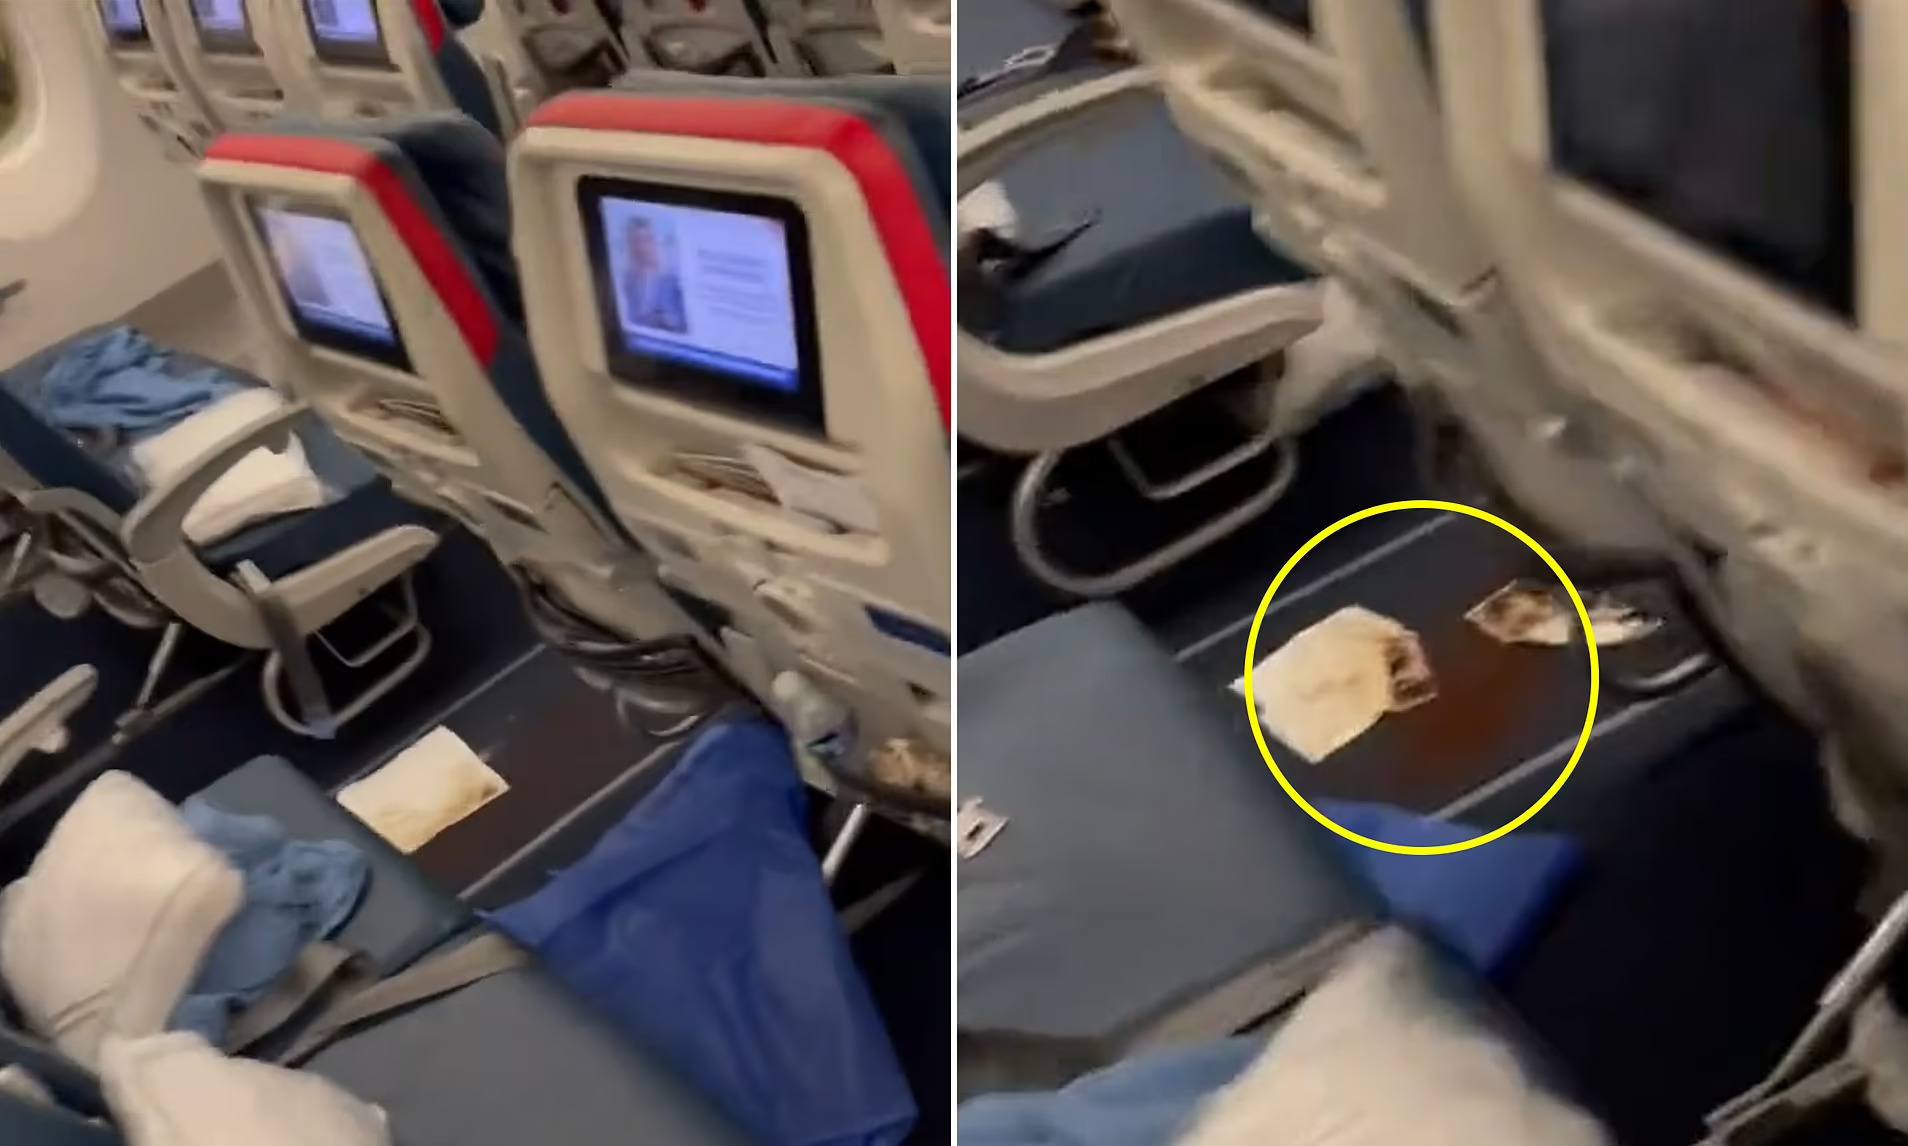 Video Shows Clean-up Operation On Flight After Passenger's Diarrhea Caused Plane To Turn Back